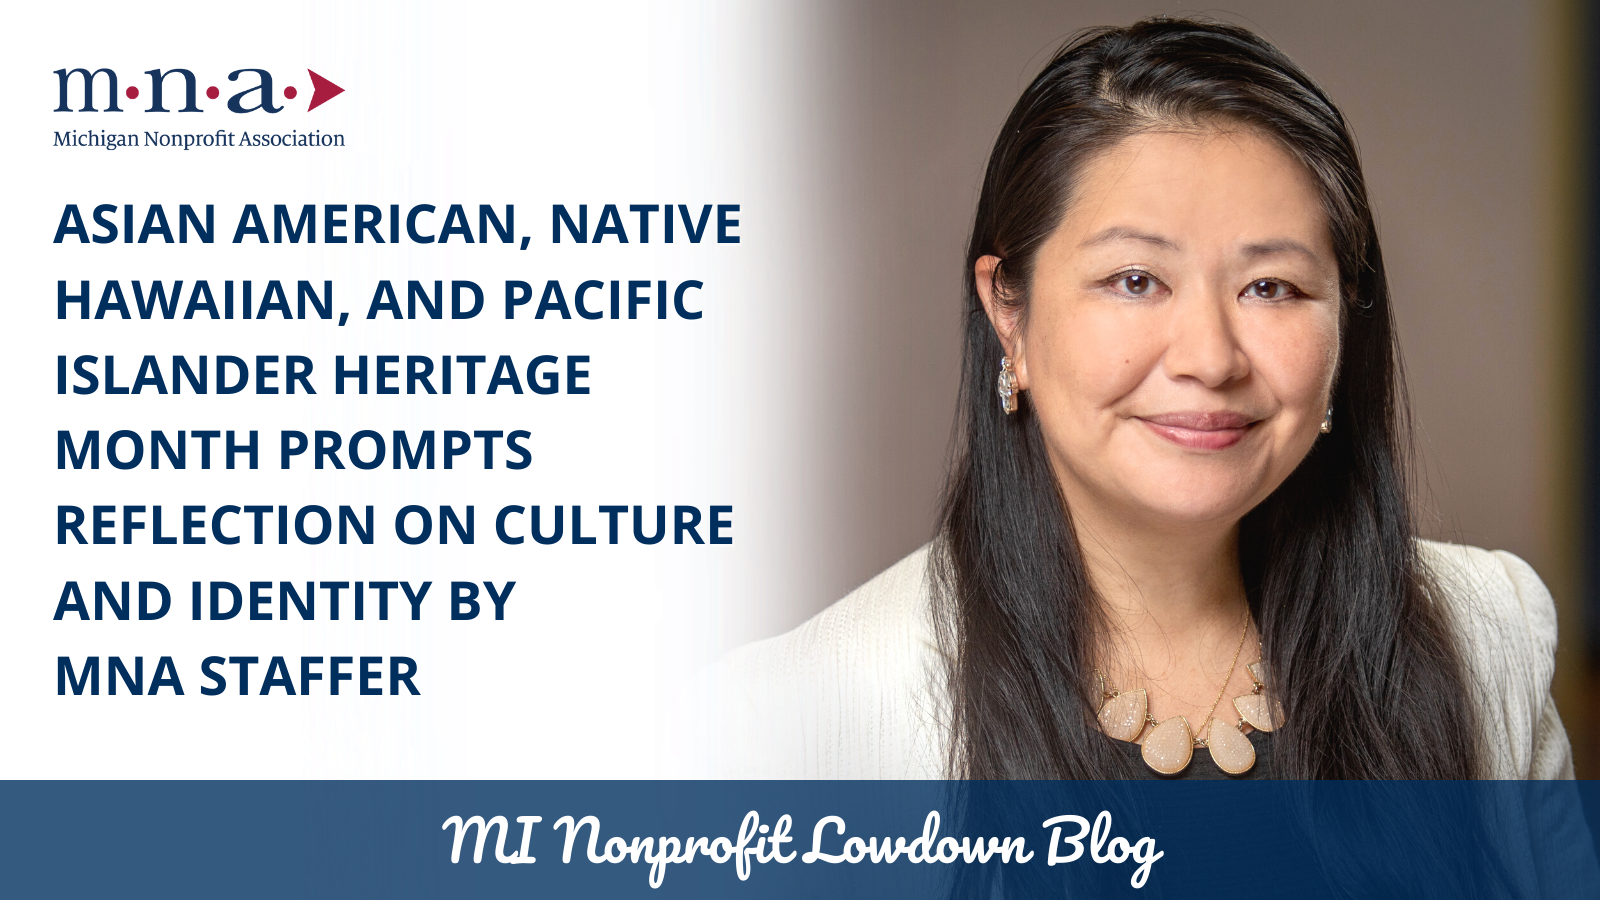 Asian American, Native Hawaiian, and Pacific Islander (AANHPI) Heritage Month Prompts Reflection on Culture and Identity by MNA Staffer